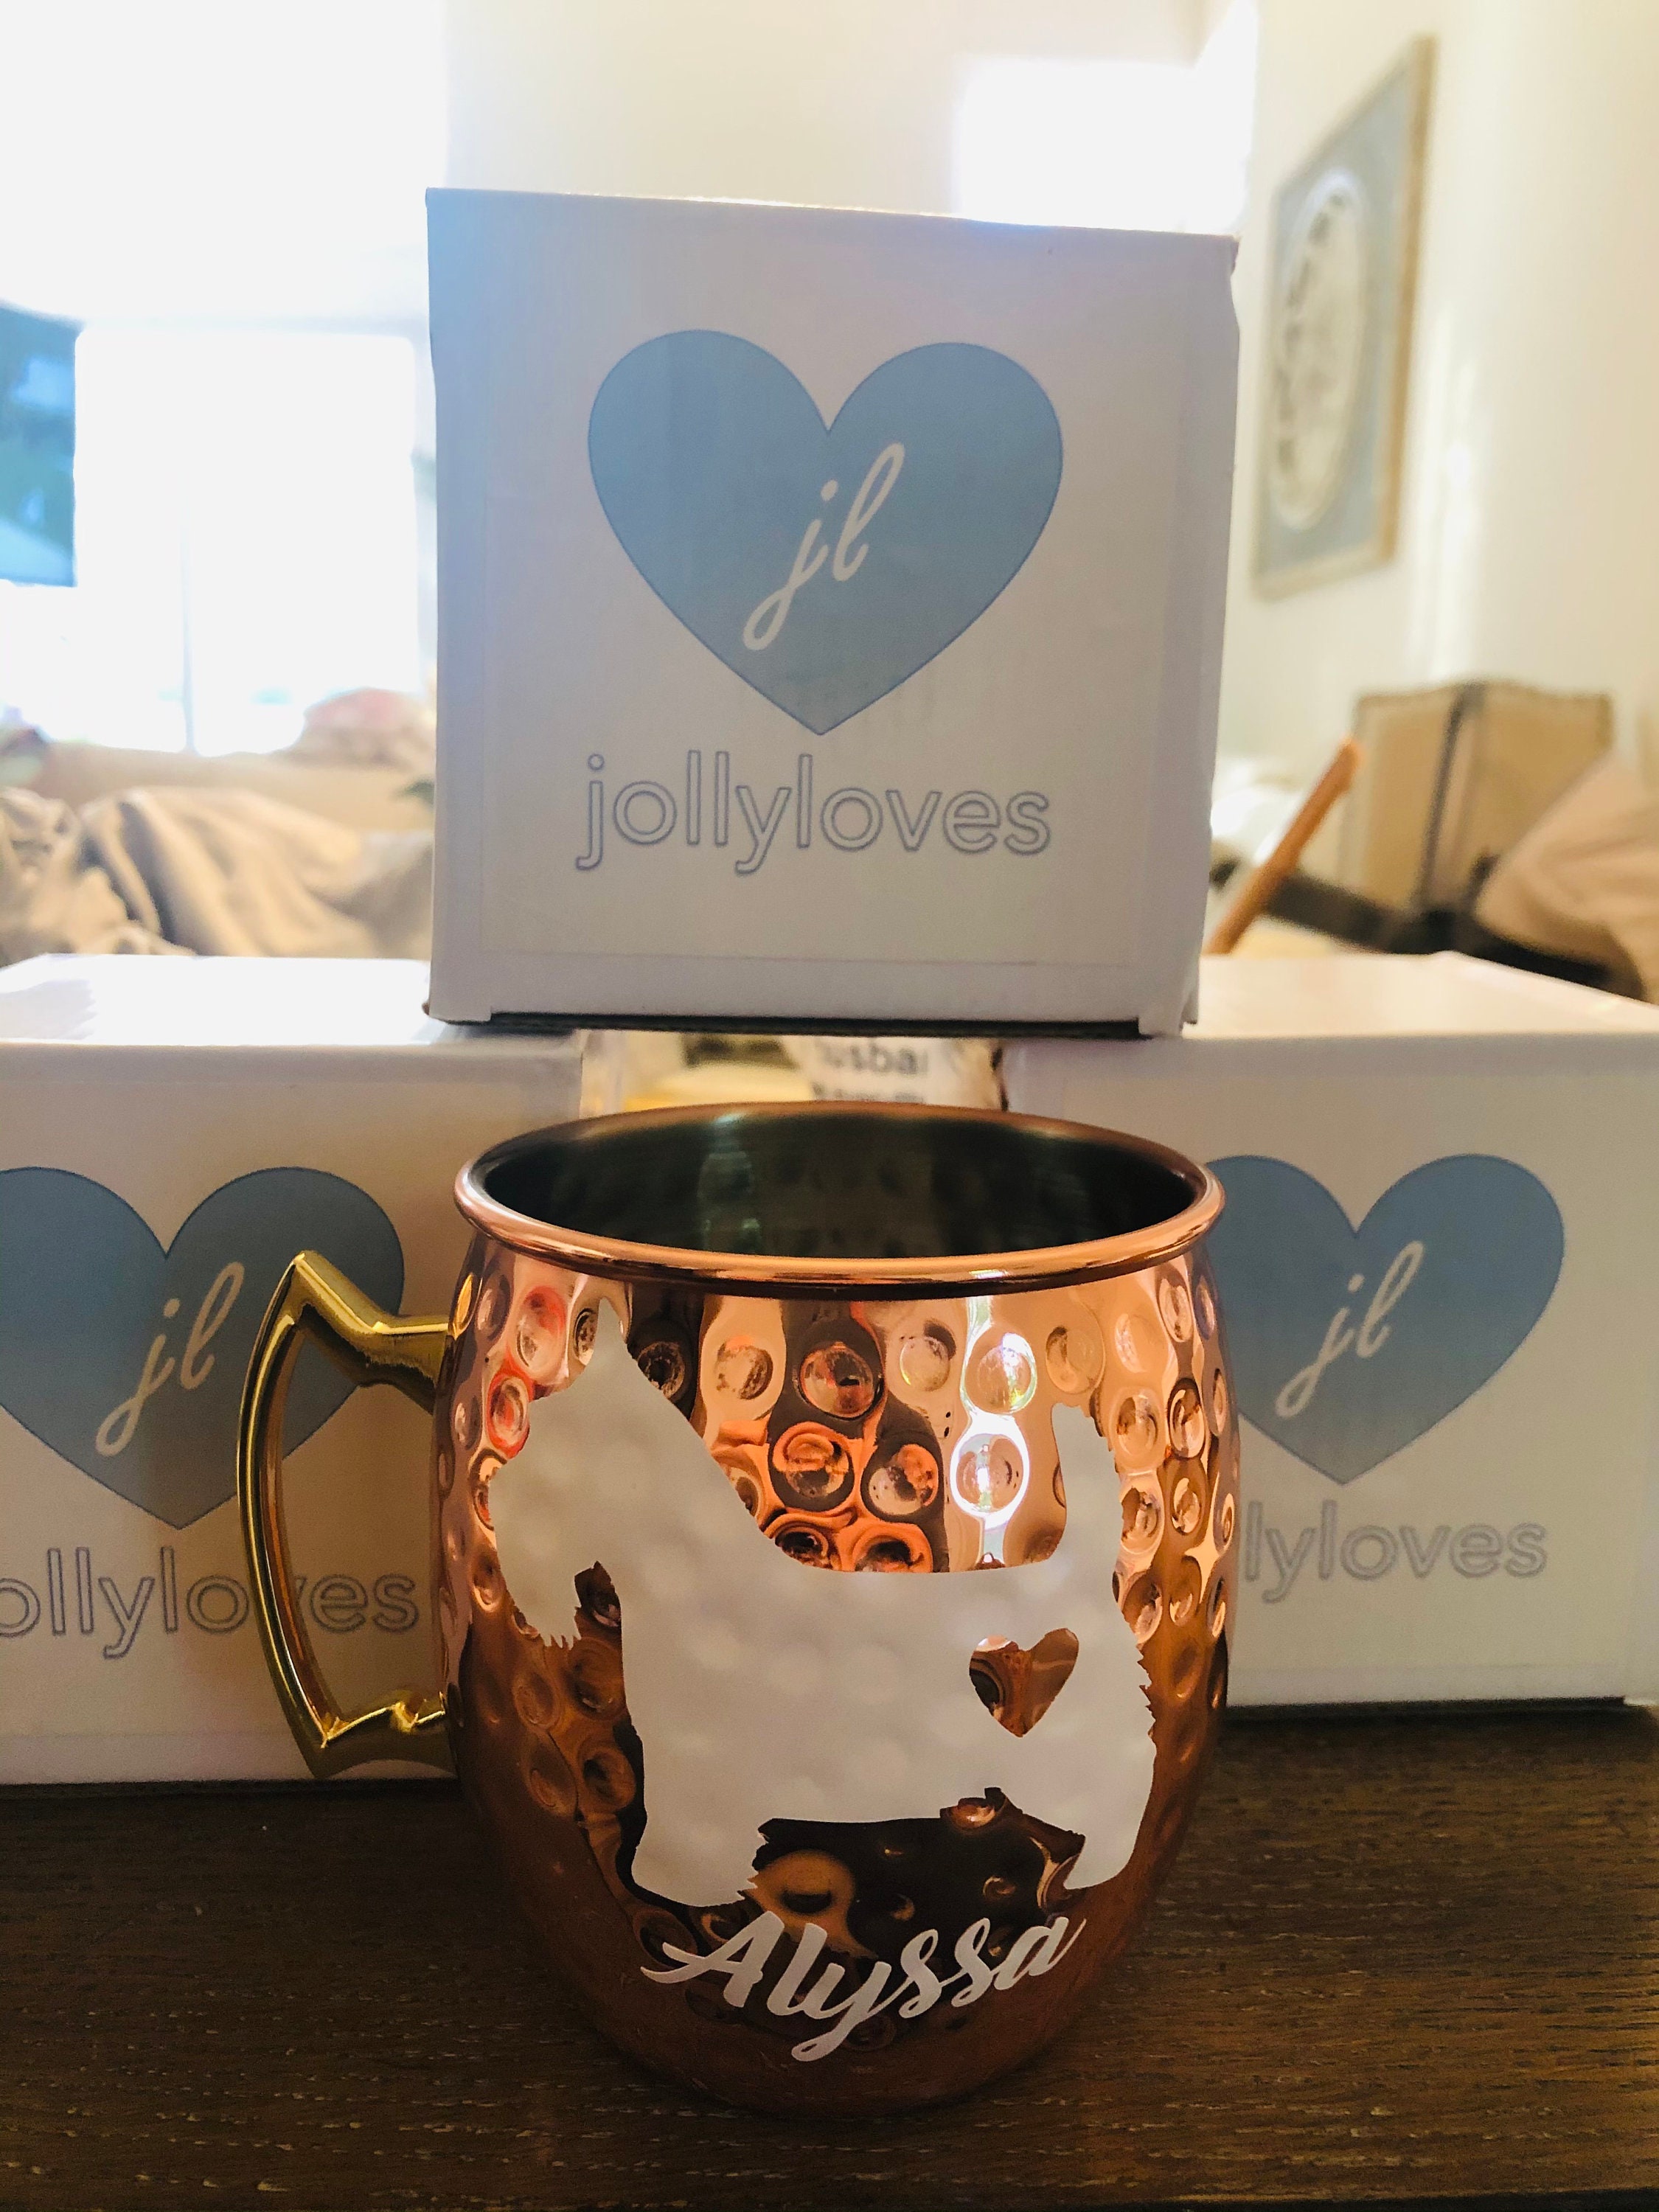 16oz Personalized Copper Mug for Moscow Mule and Other Drinks- Personalized  Gift for Bridesmaids - Bridesmaid Gifts Boutique